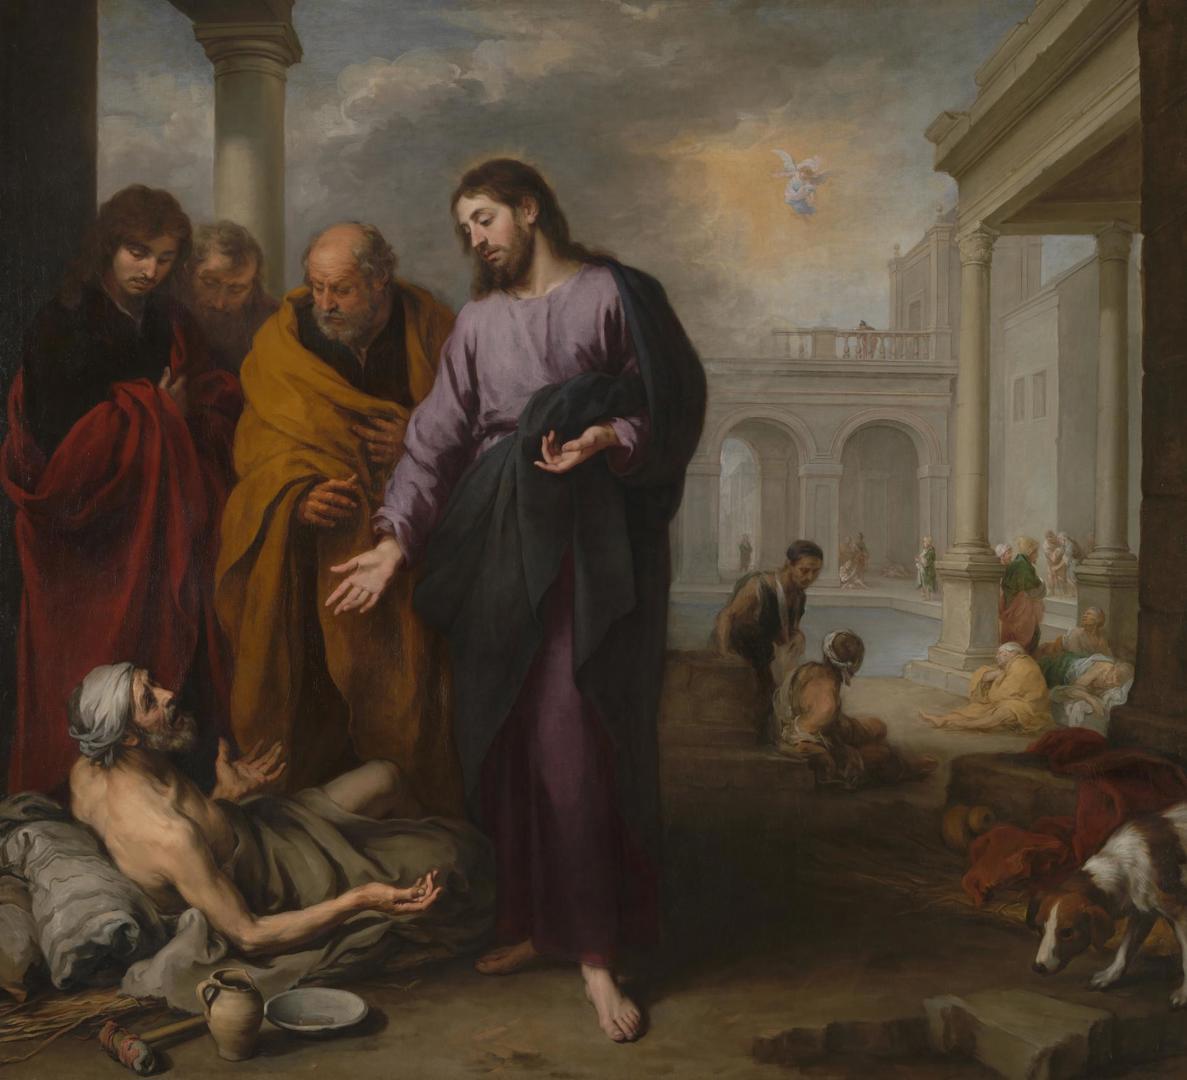 Christ healing the Paralytic at the Pool of Bethesda by Bartolomé Esteban Murillo